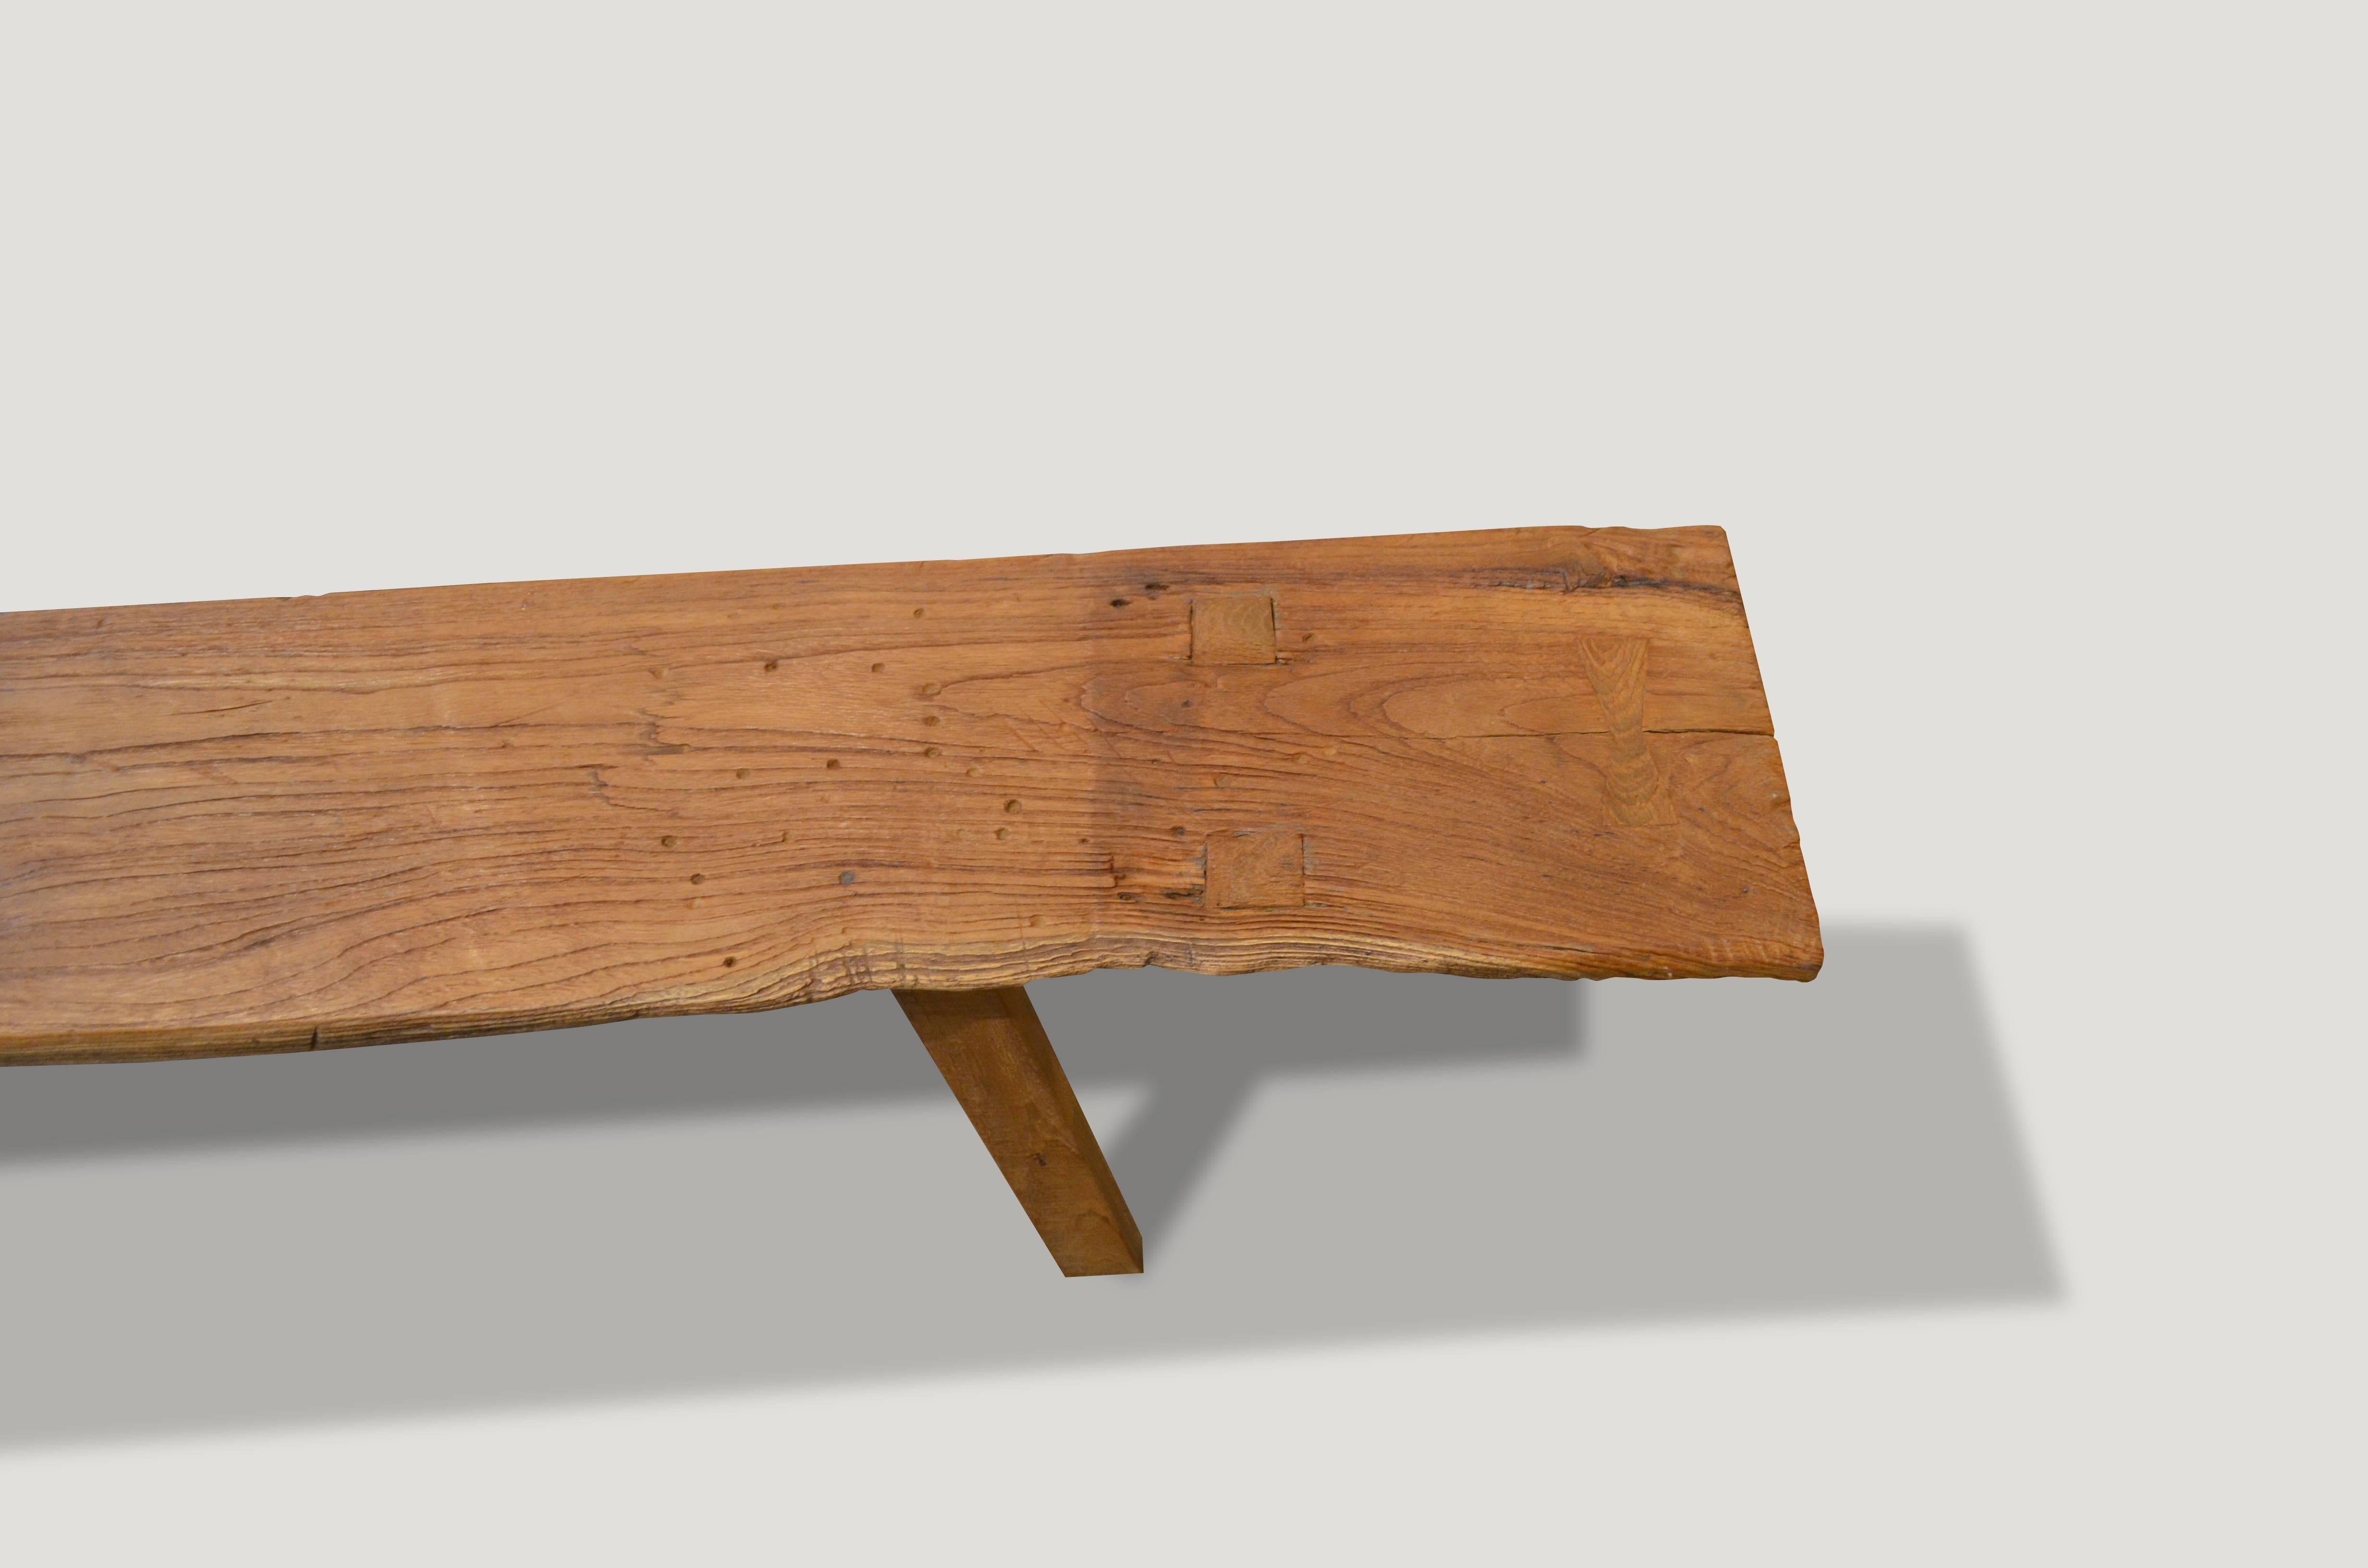 Antique single slab bench or coffee table with beautiful patina and added butterfly detail. Can also be used as a shelf.

This bench was sourced in the spirit of wabi-sabi, a Japanese philosophy that beauty can be found in imperfection and